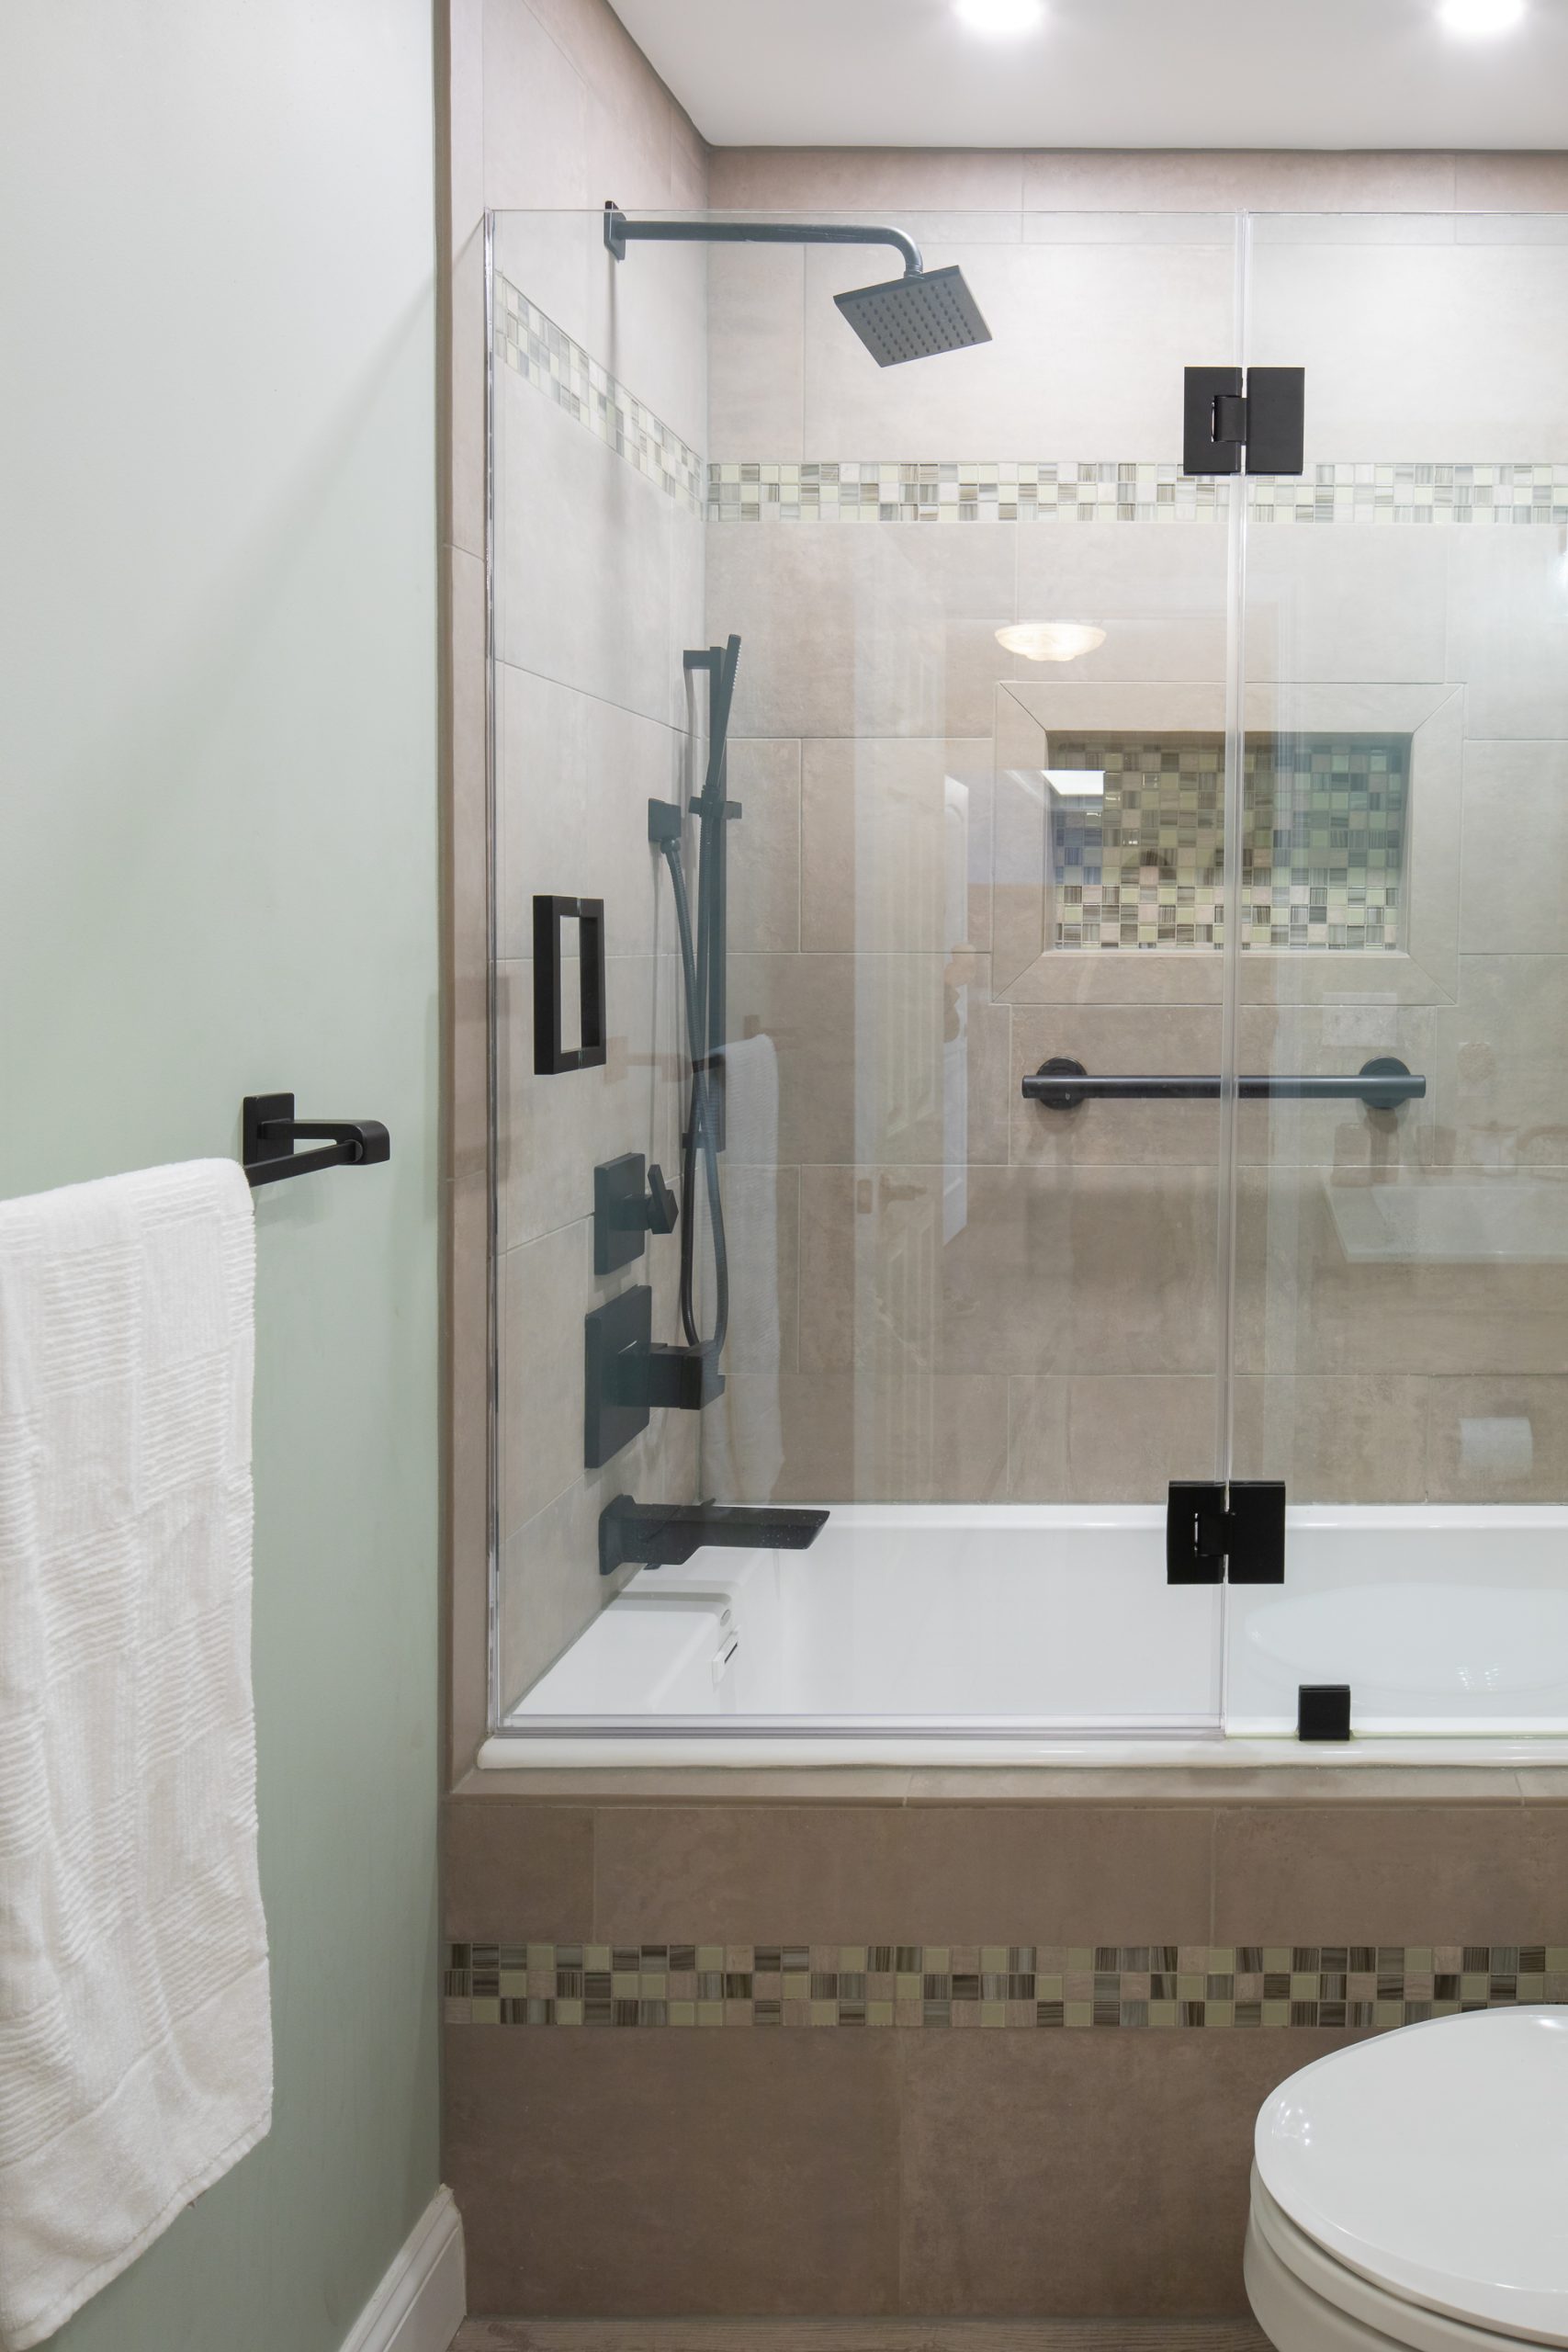 A renovated bathroom tub and shower